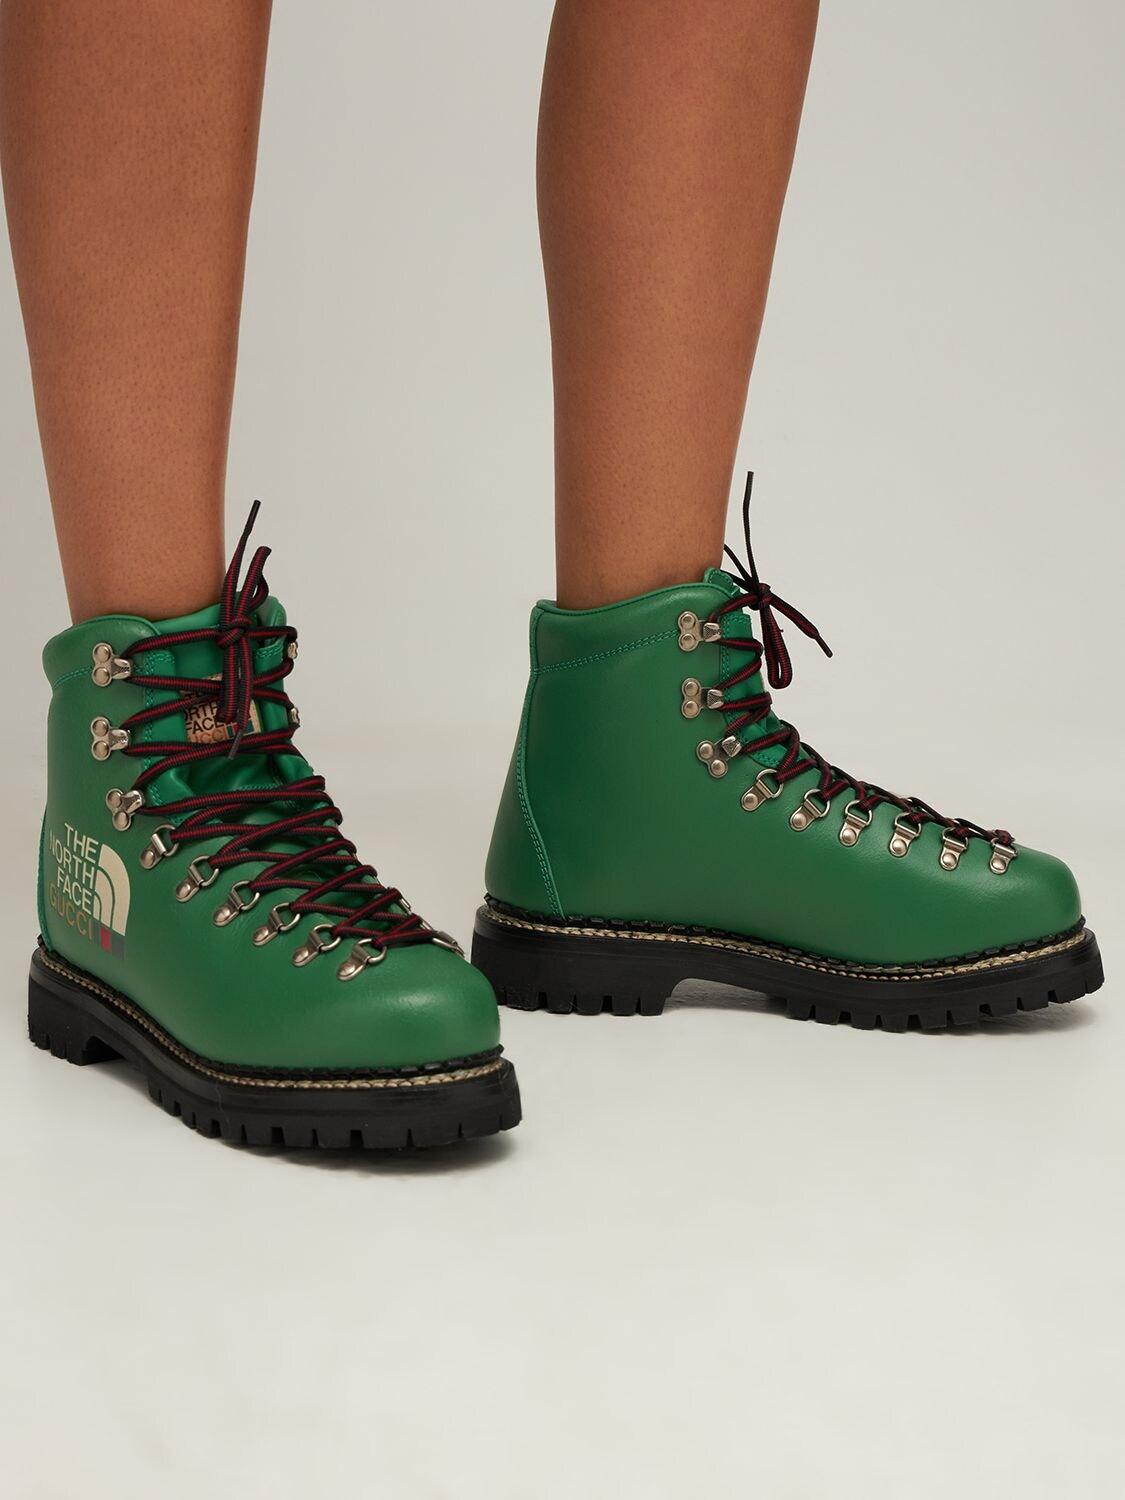 Gucci X The North Face Leather Hiking Boots in Green | Lyst UK